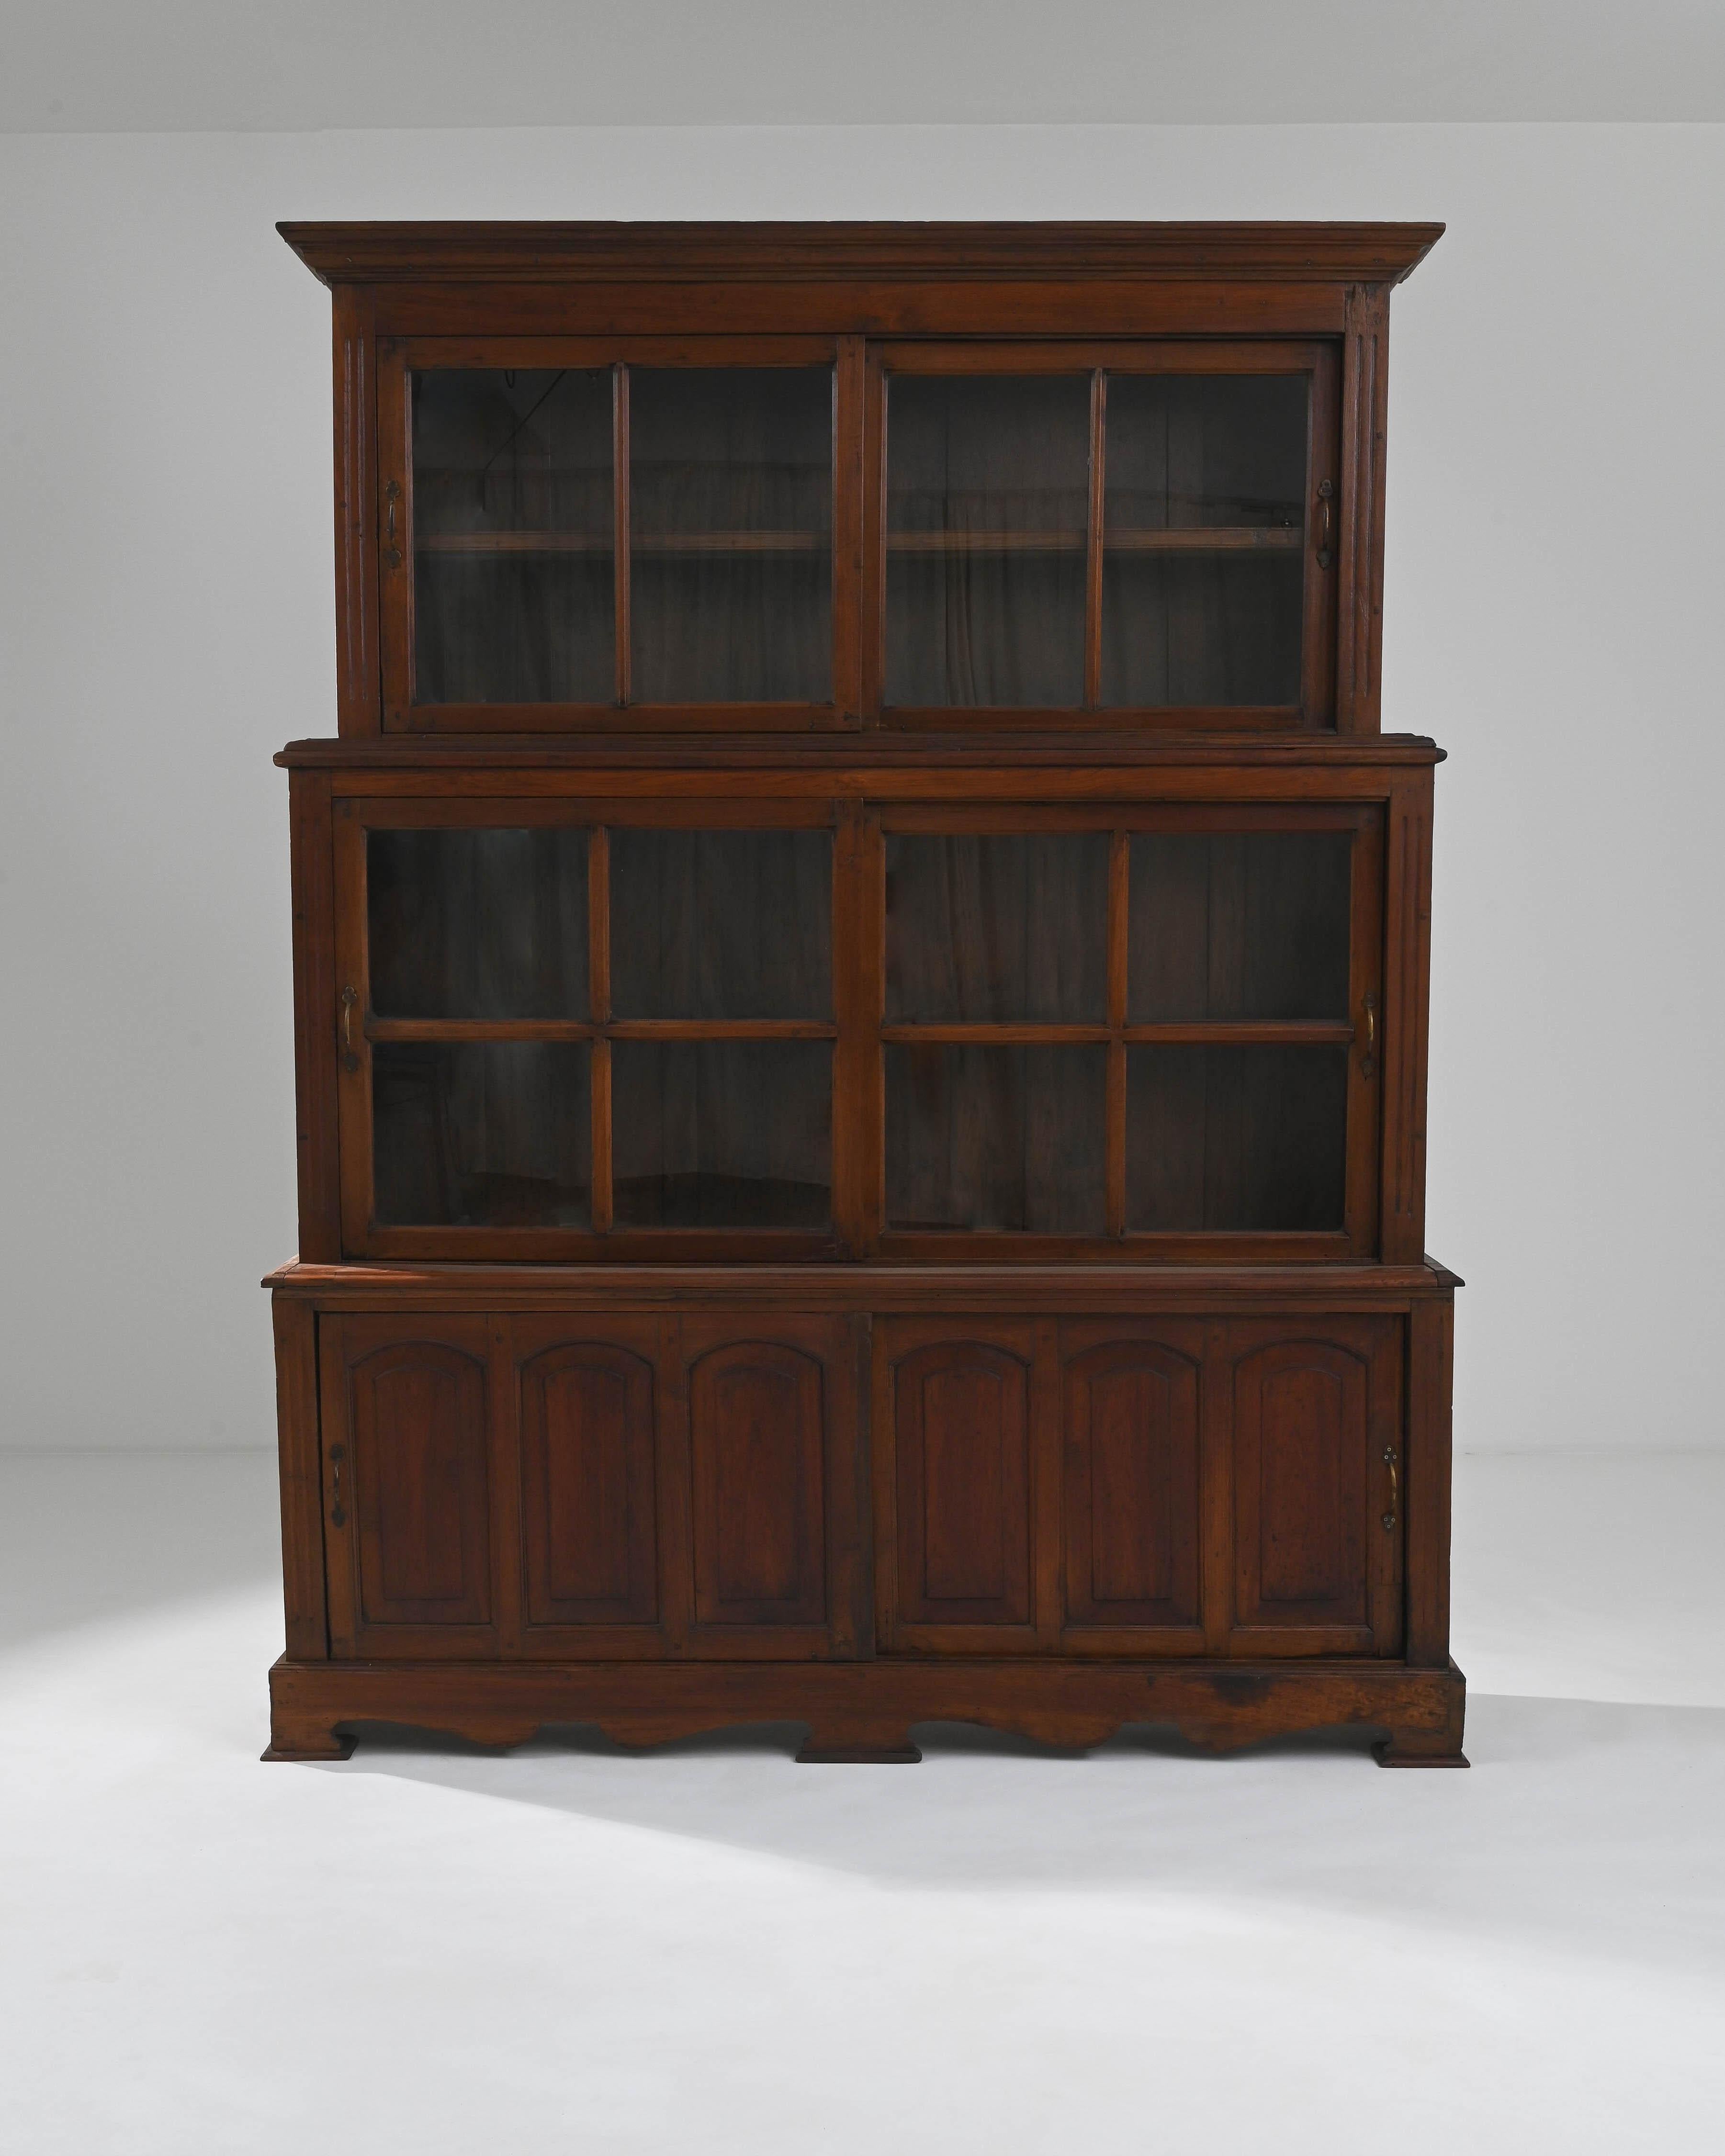 A wooden vitrine created in Asia circa 1900. This towerings display case is composed of three stacked levels of glass compartments. Sliding doors on each level allow access to the ample storage space within. The preserved original patina glows a